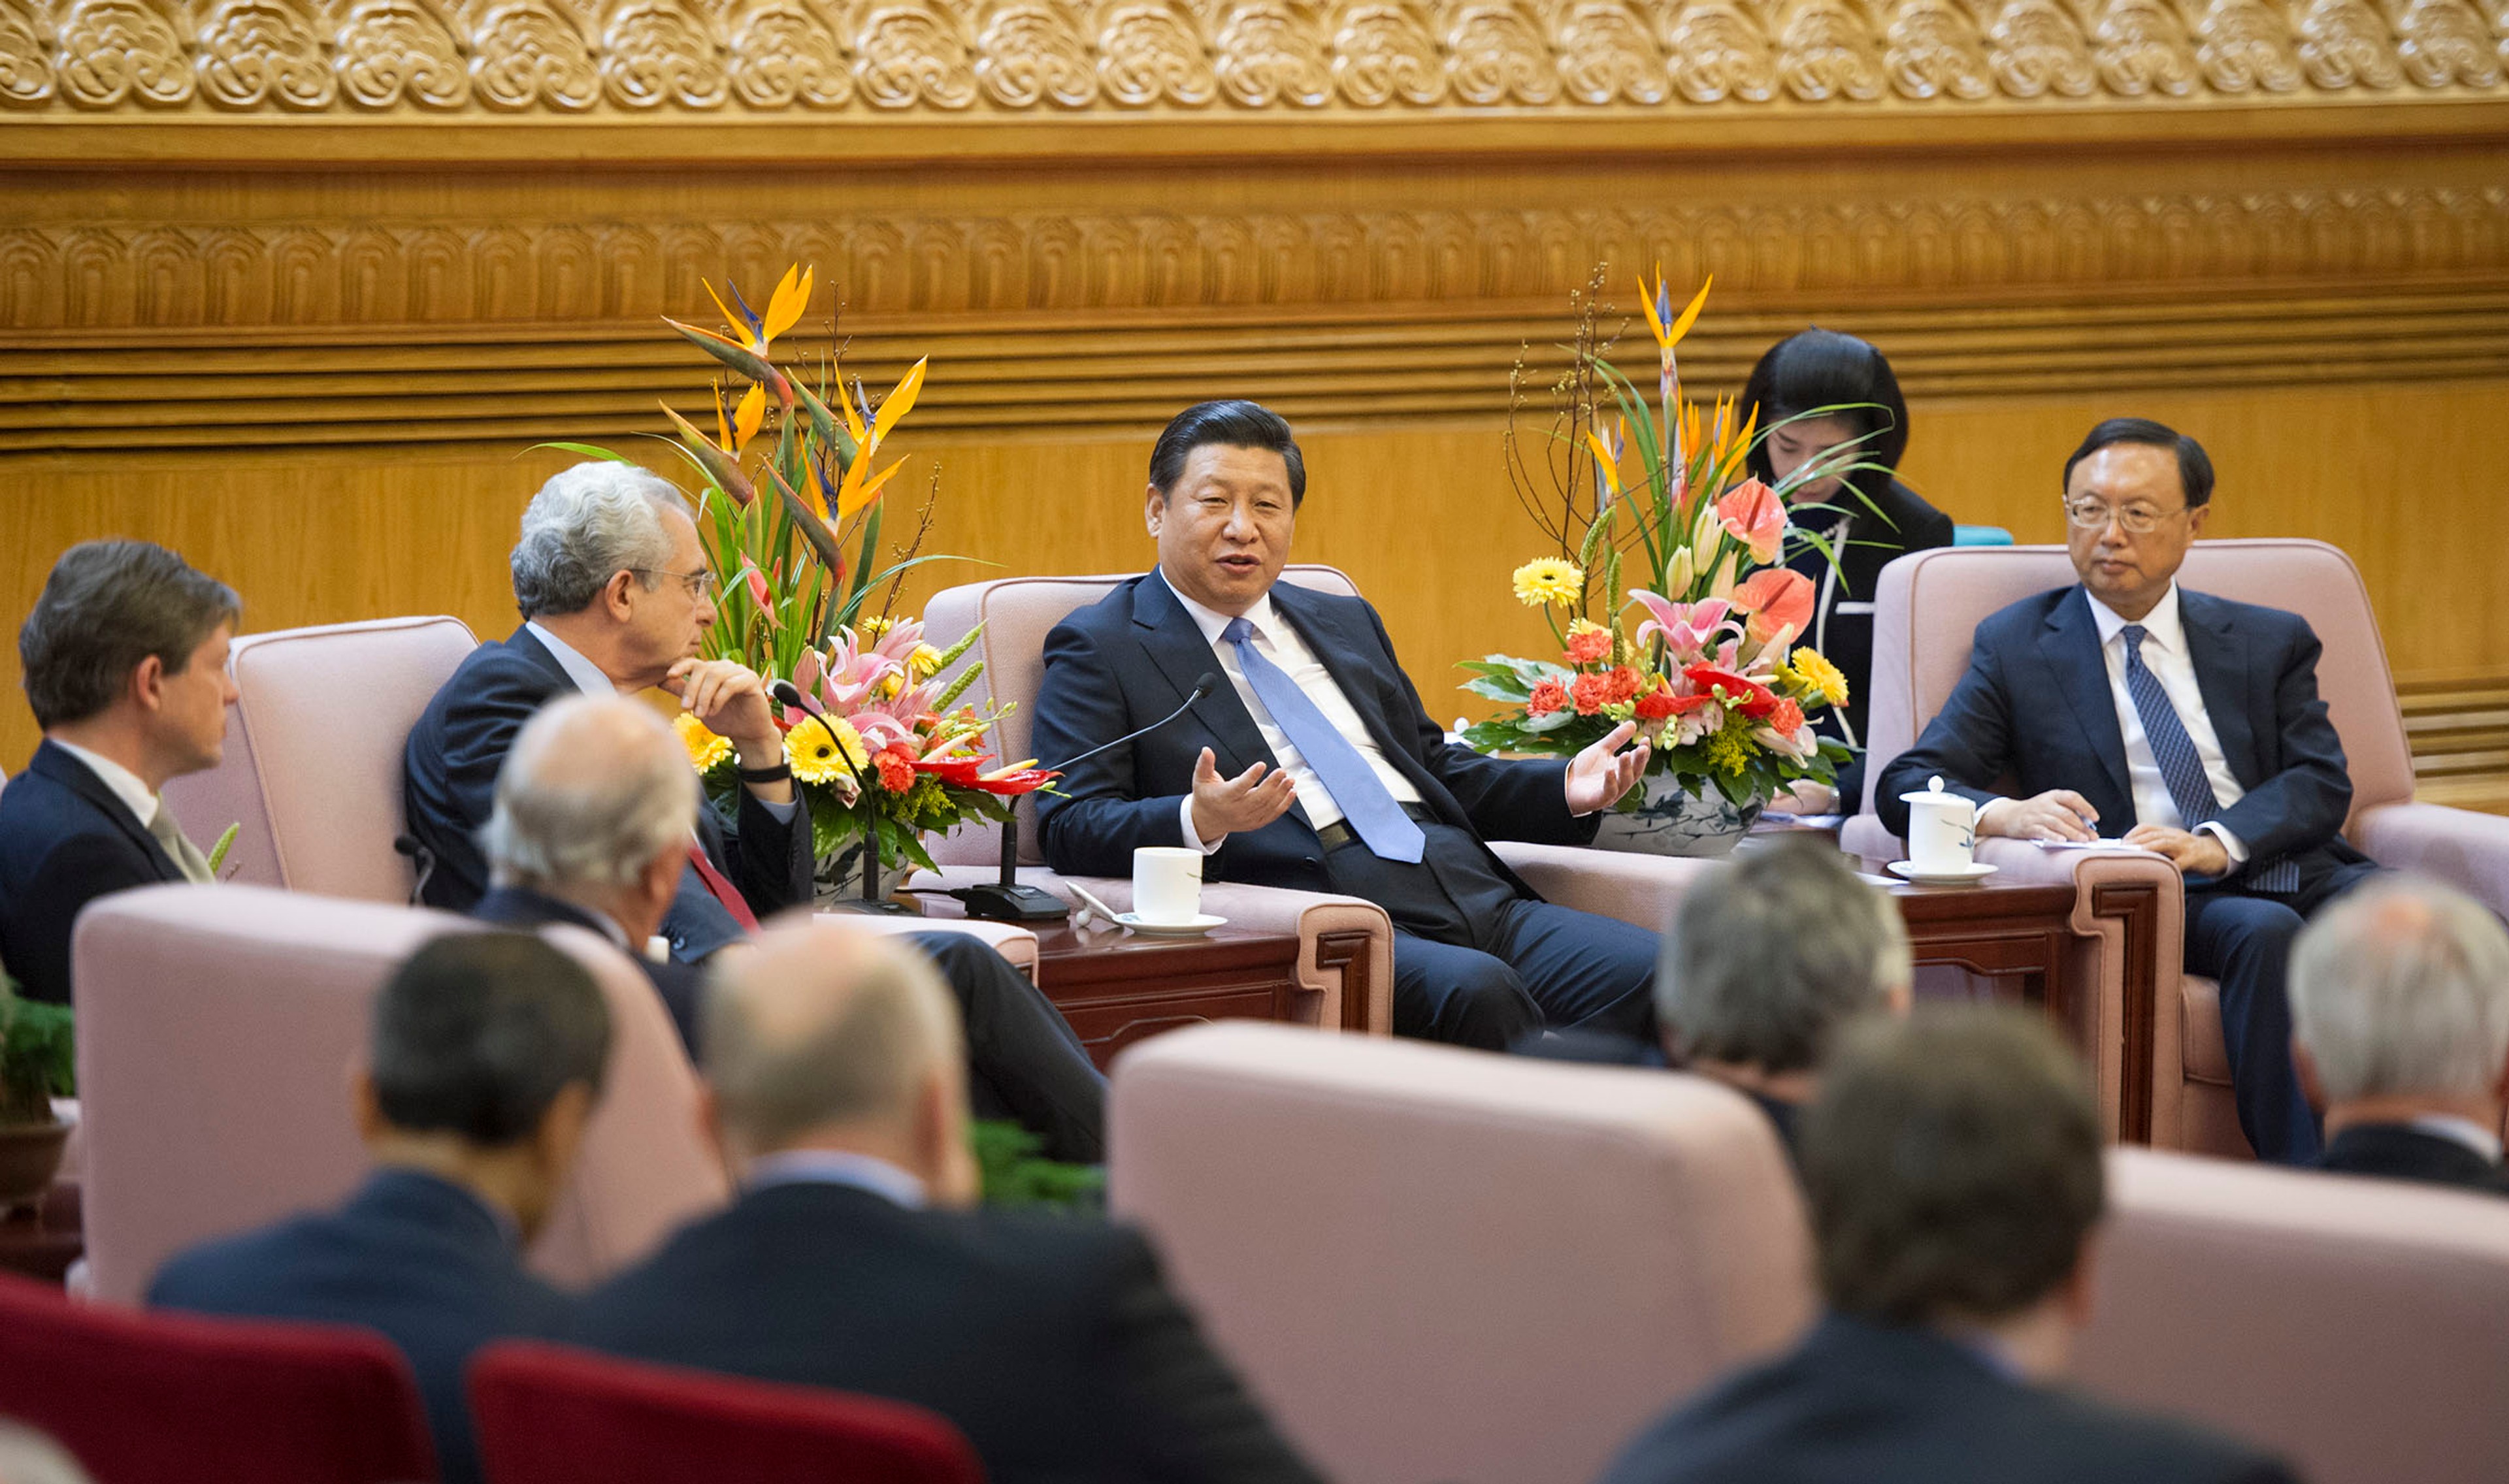 Nicolas Berggruen, Ernesto Zedillo, and Xi Jinping at first "Understanding China" Conference with 21st CC in Beijing